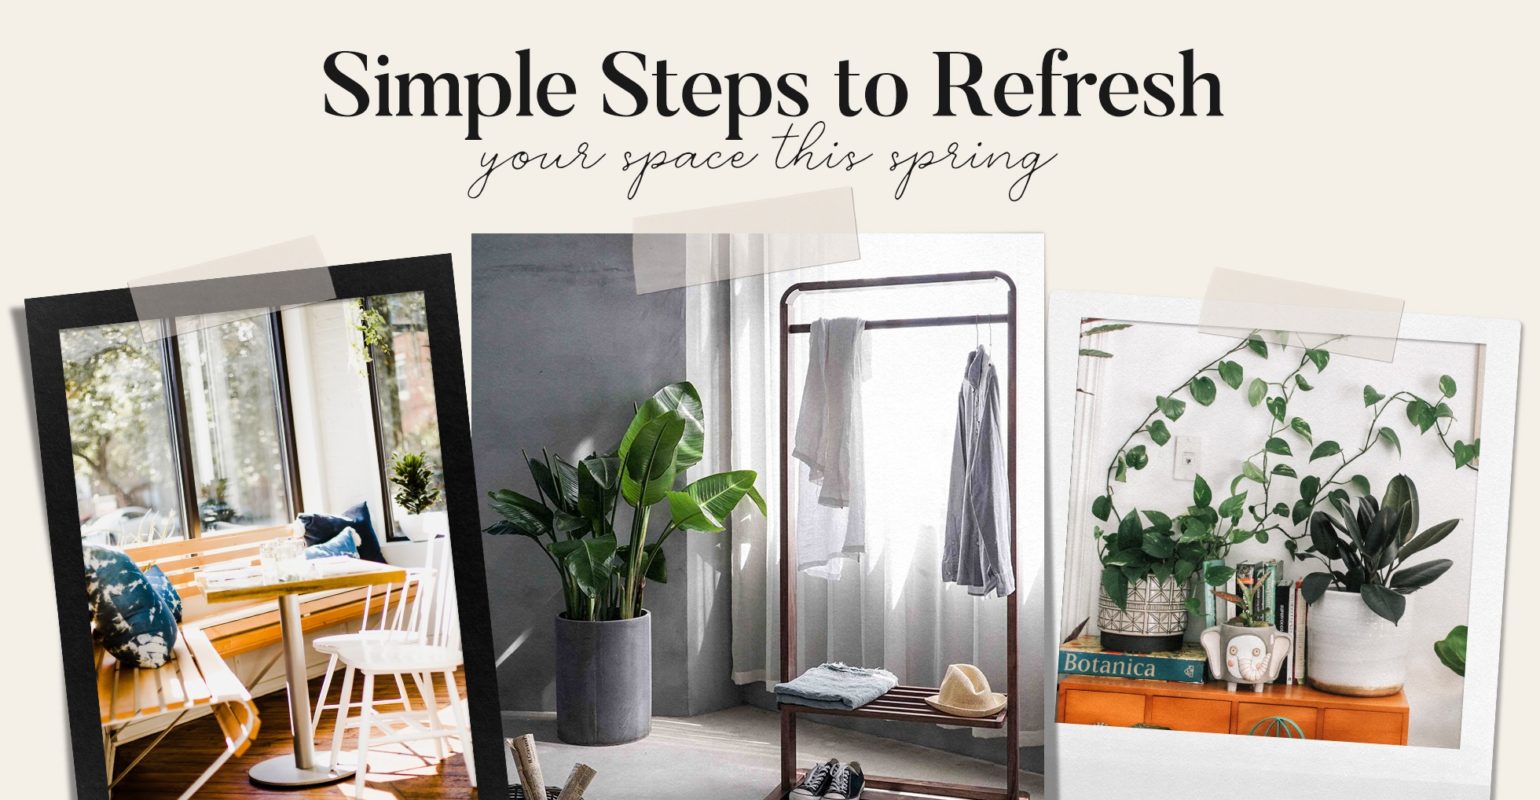 Simple Steps to Refresh Your Space This Spring